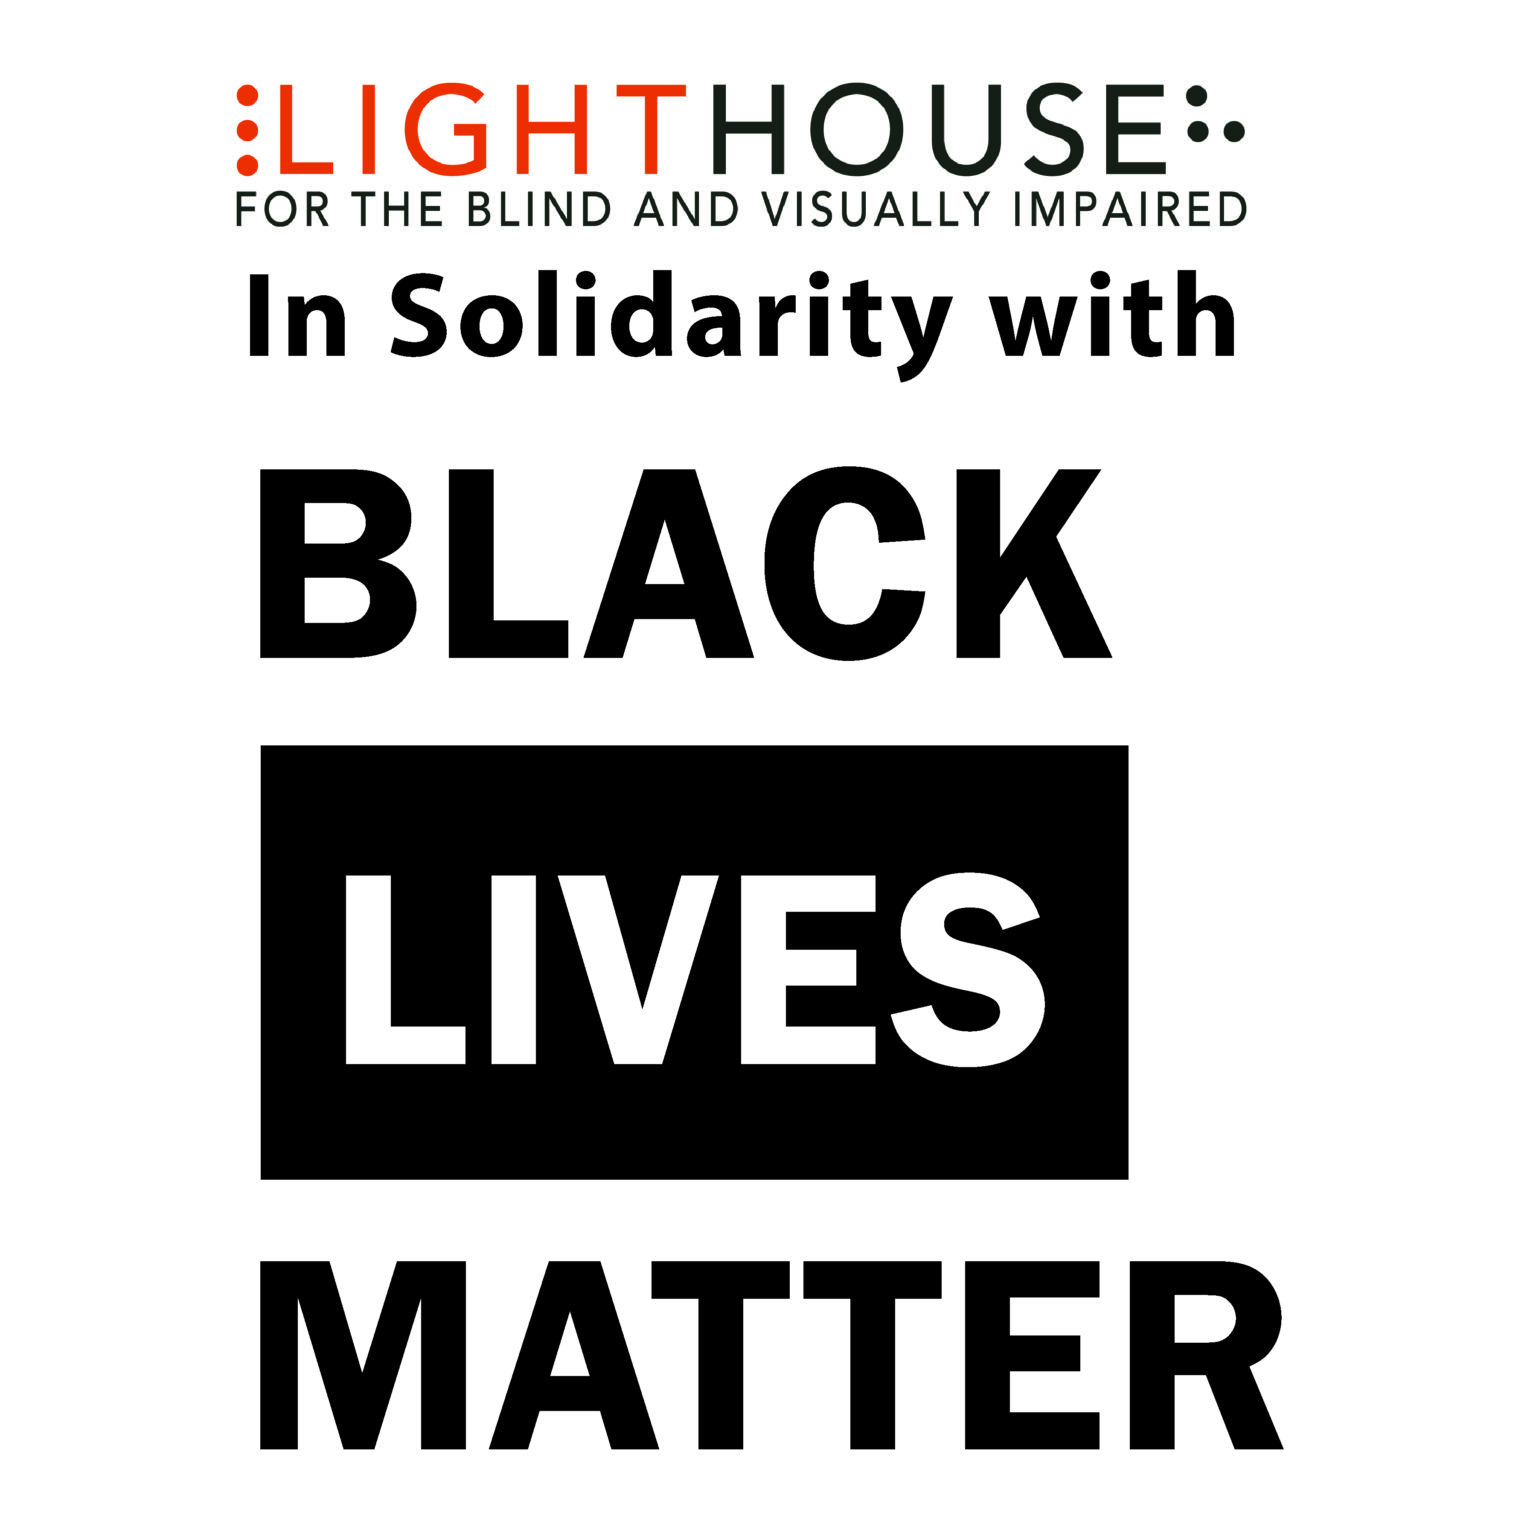 LightHouse in solidarity with Black Lives Matter